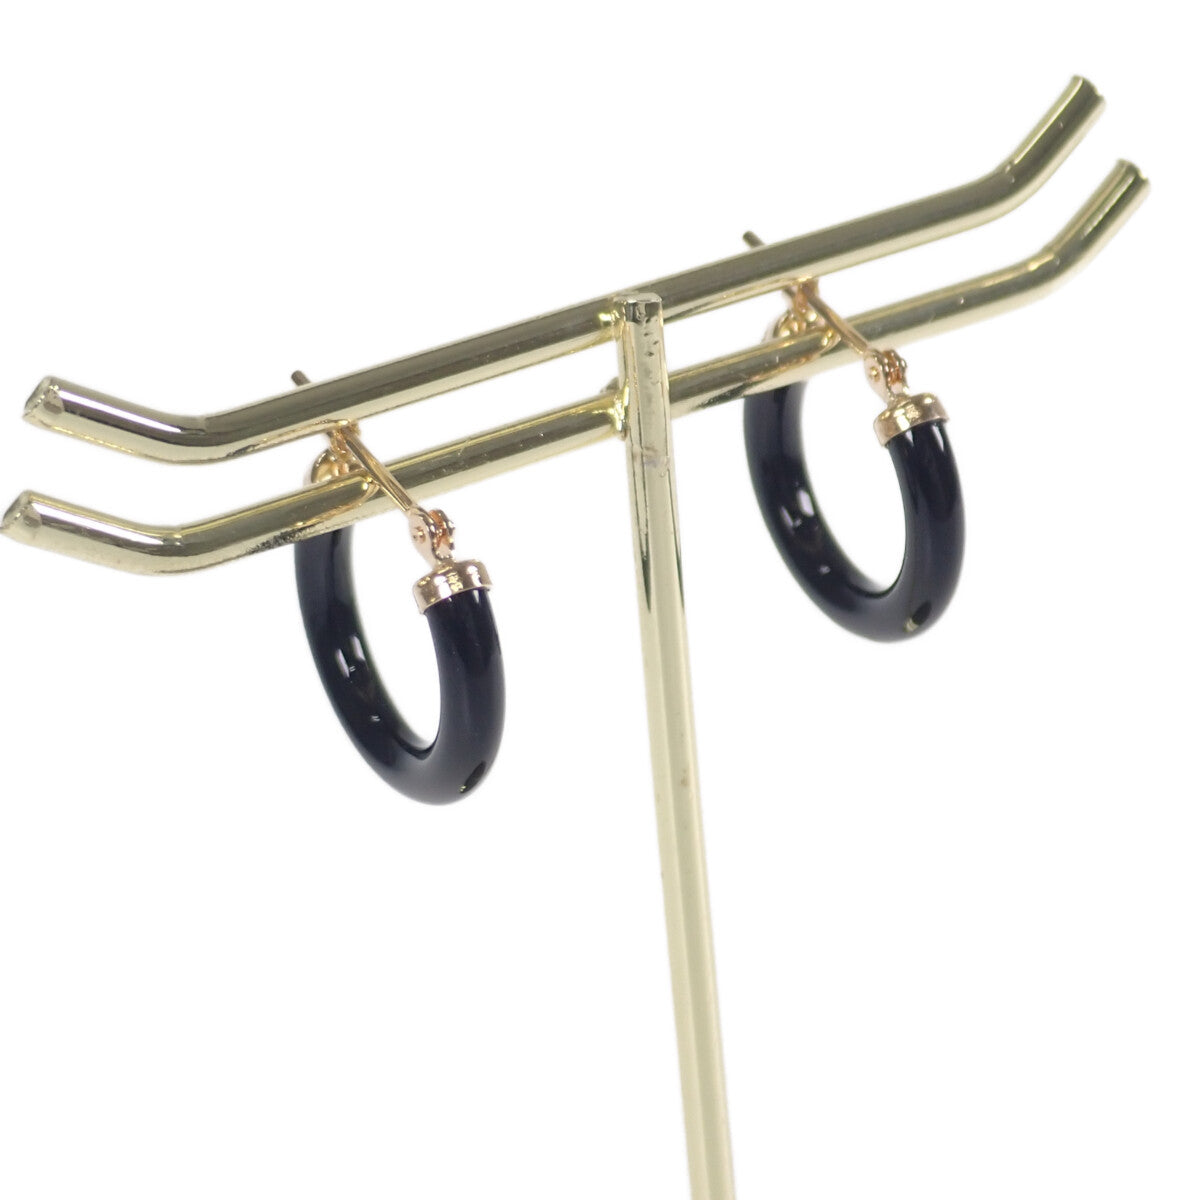 [LuxUness]  Women's Onyx Hoop Design Earrings in K18 Yellow Gold, Gold, Never Used, Pre-owned in Brand new